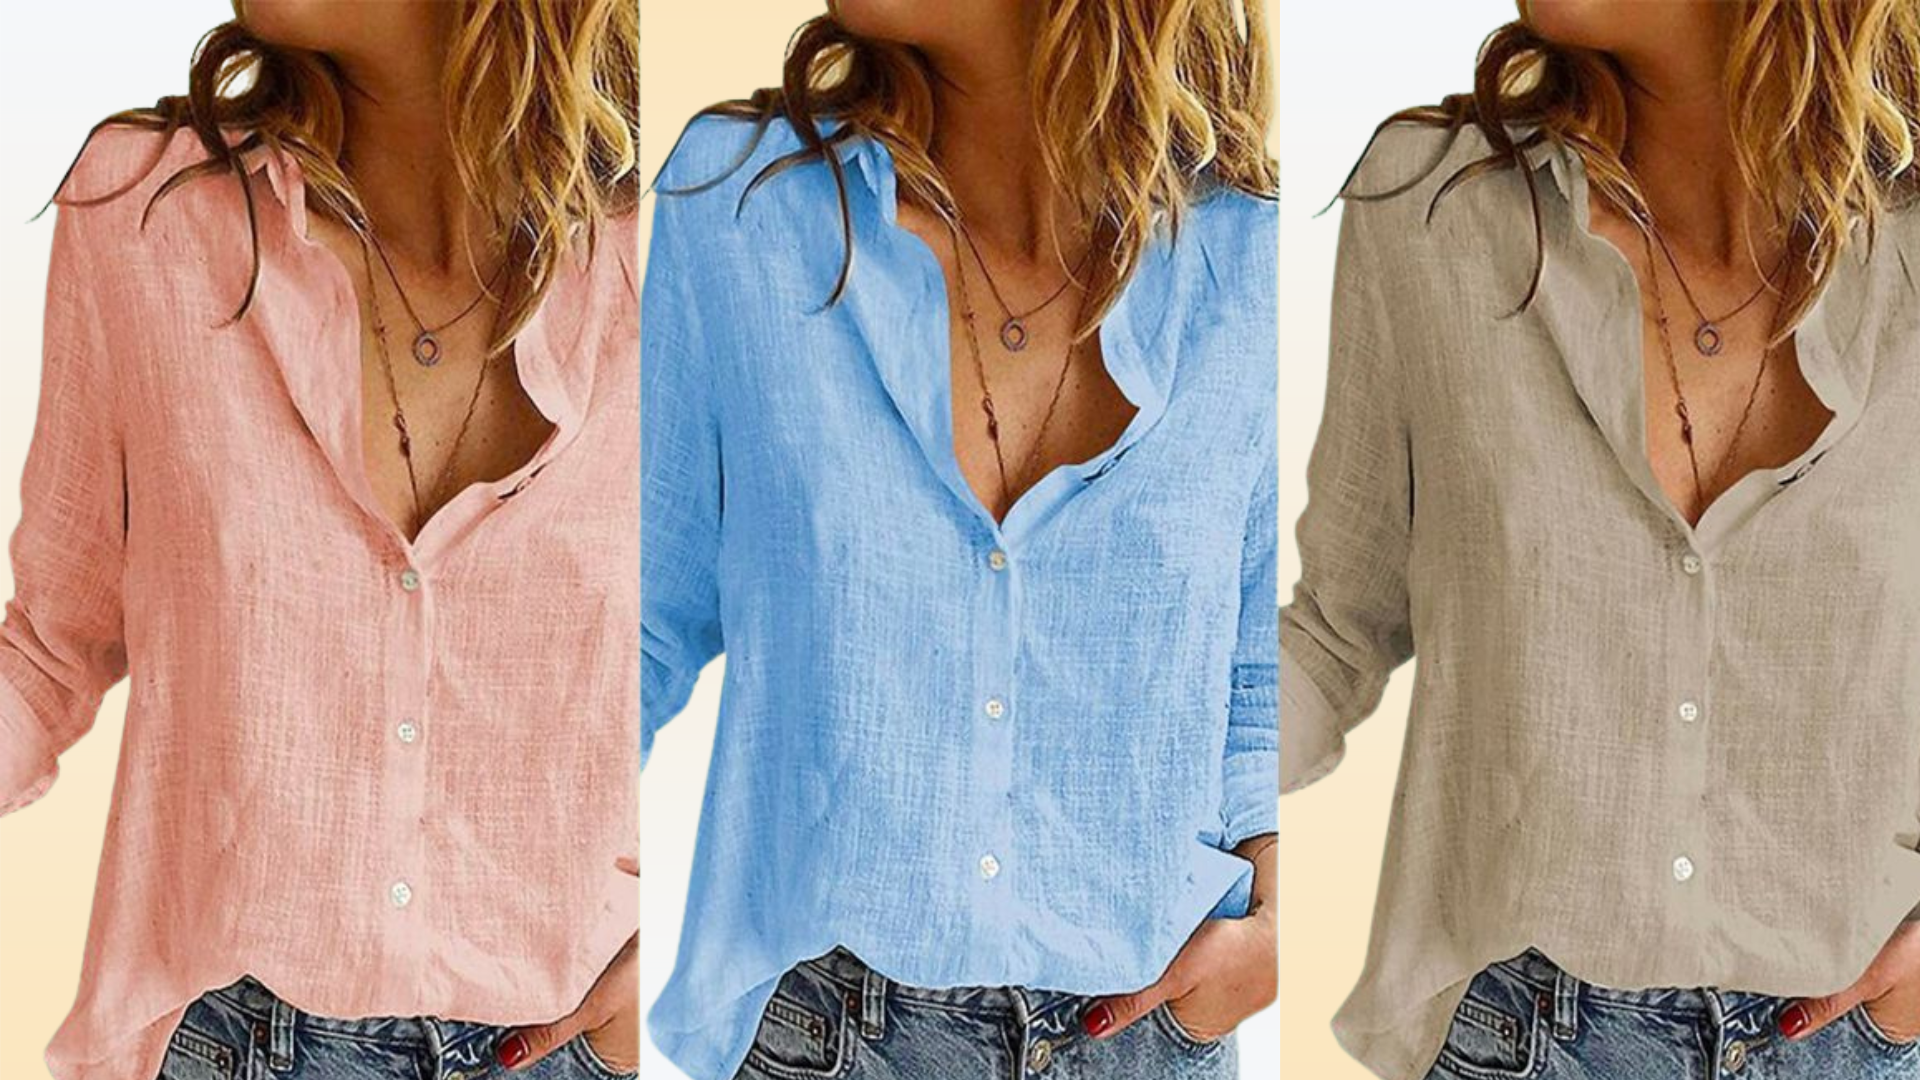 'Comfy, cool and doesn't wrinkle': This breezy summer top is on sale for $22 (that's nearly 70% off)